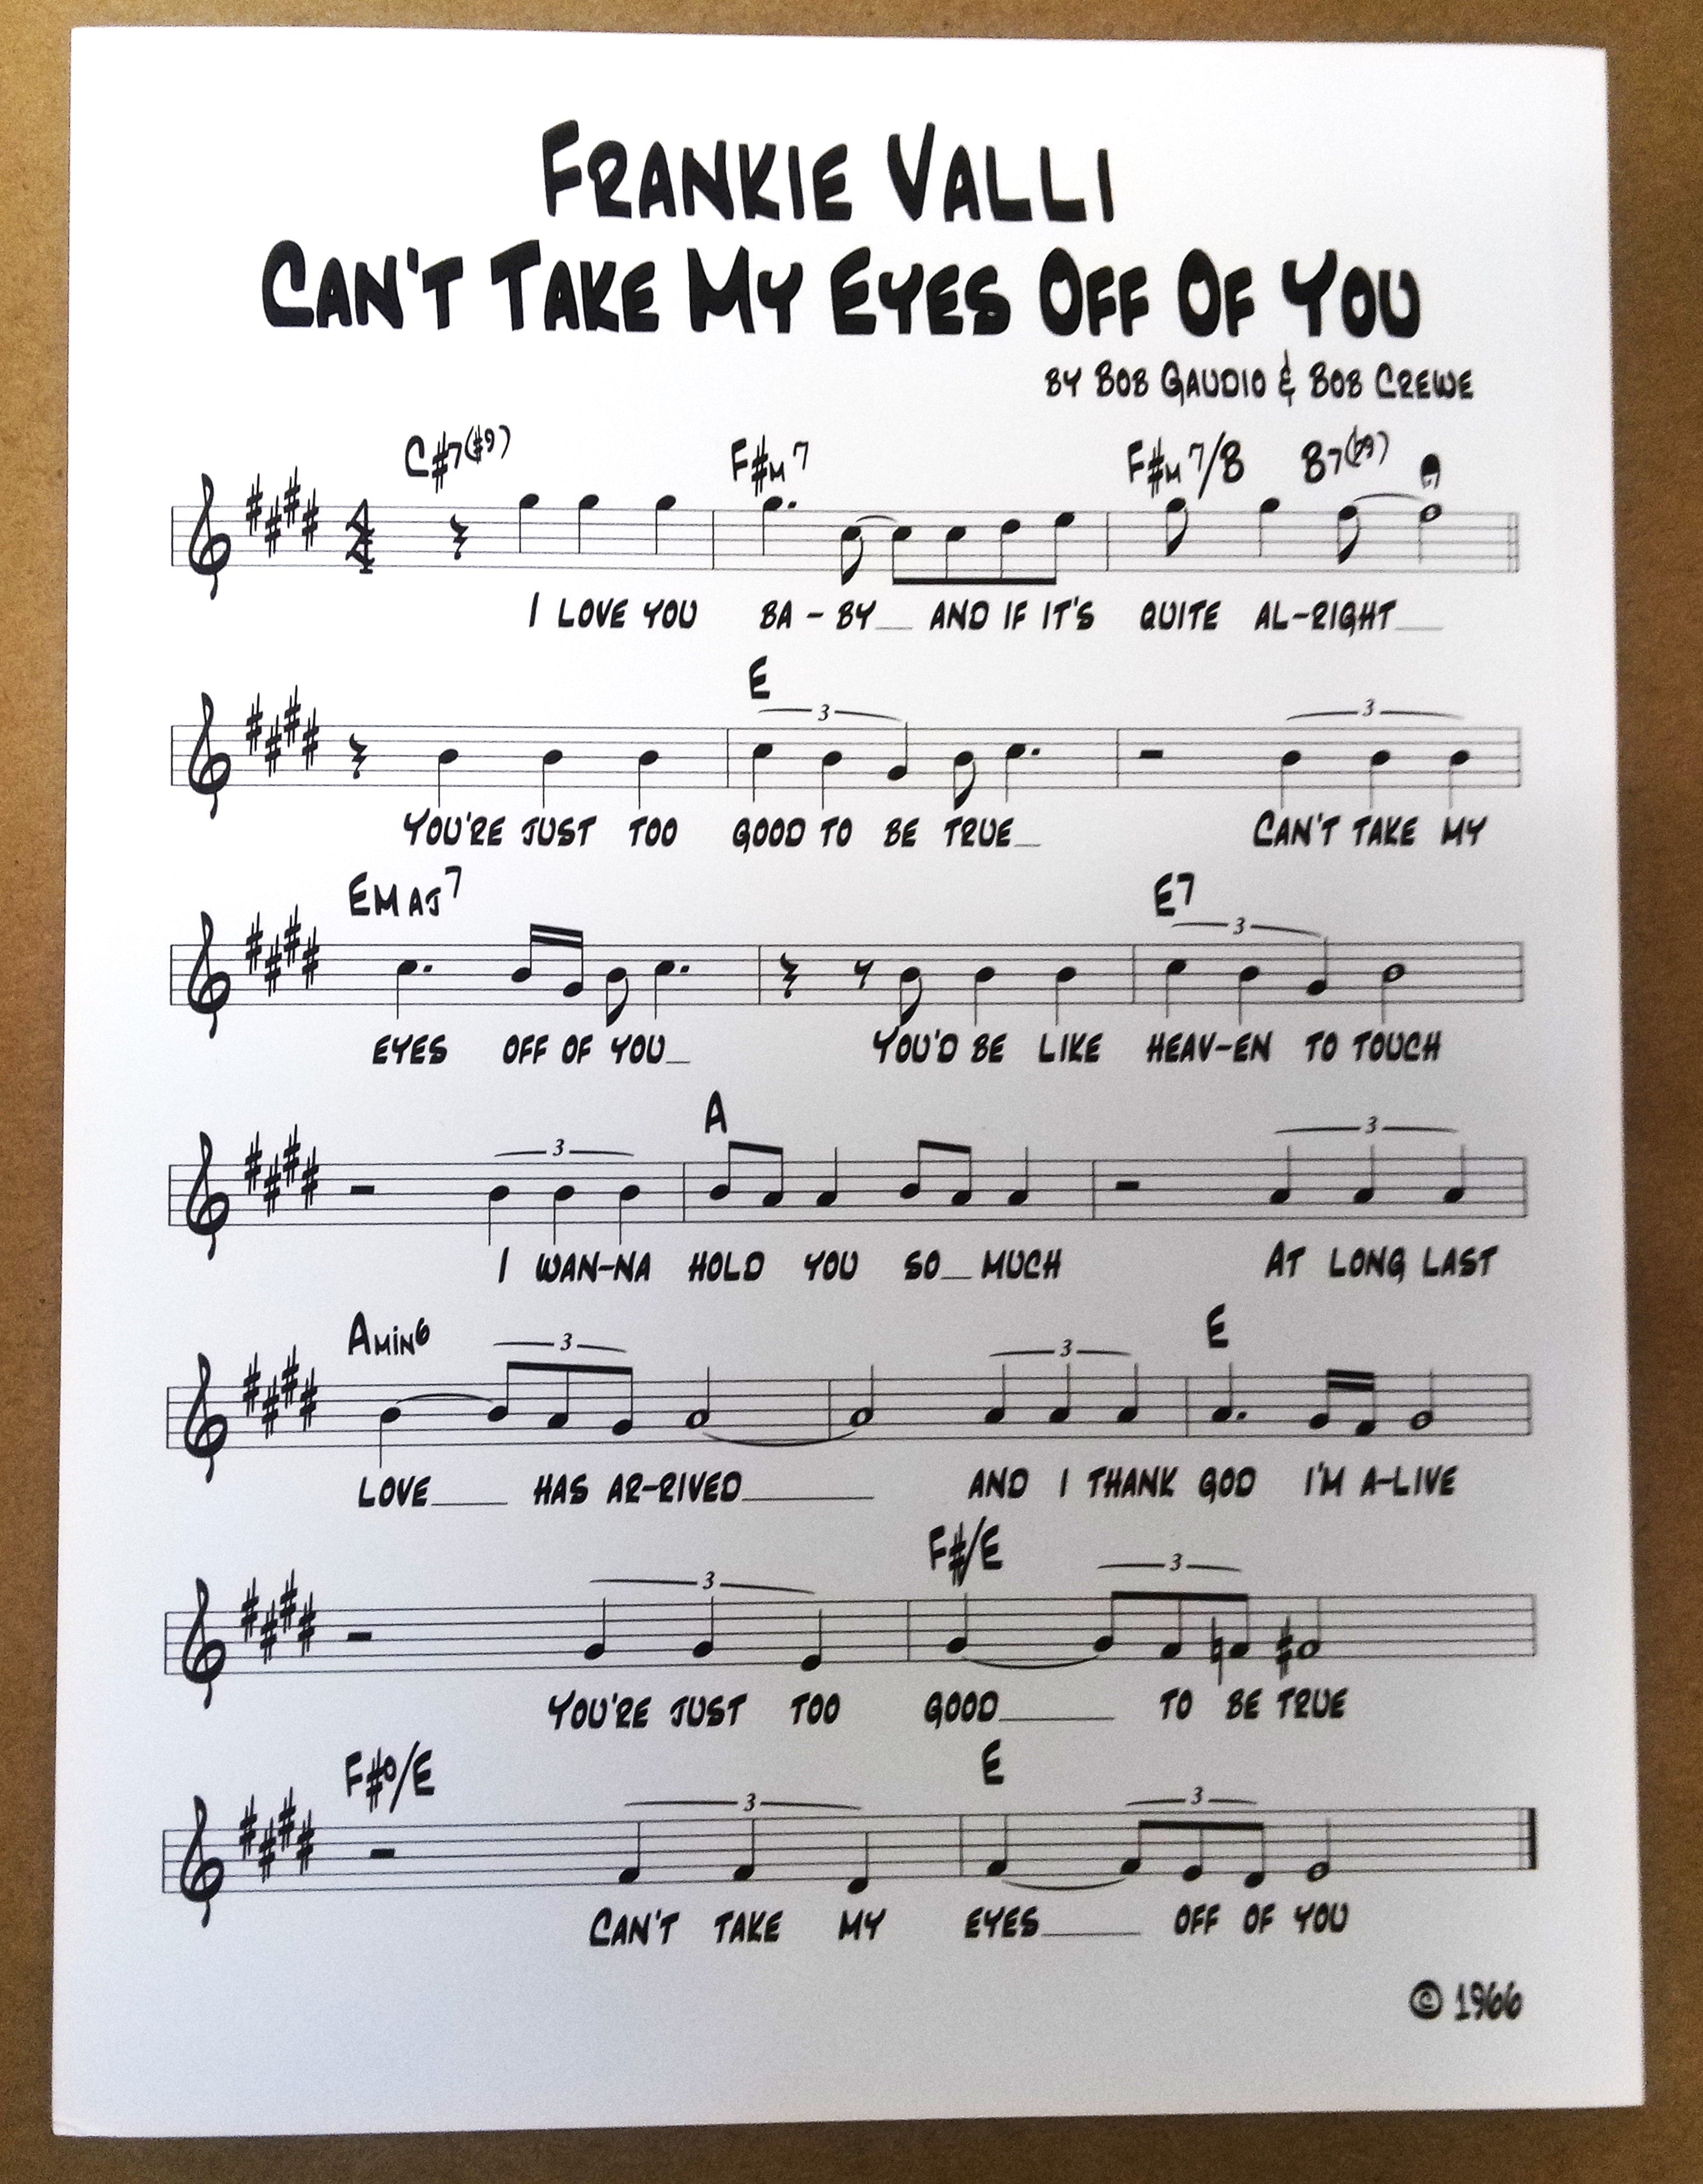 Frankie Valli - Can't Take My Eyes Off of You Sheet Music Print